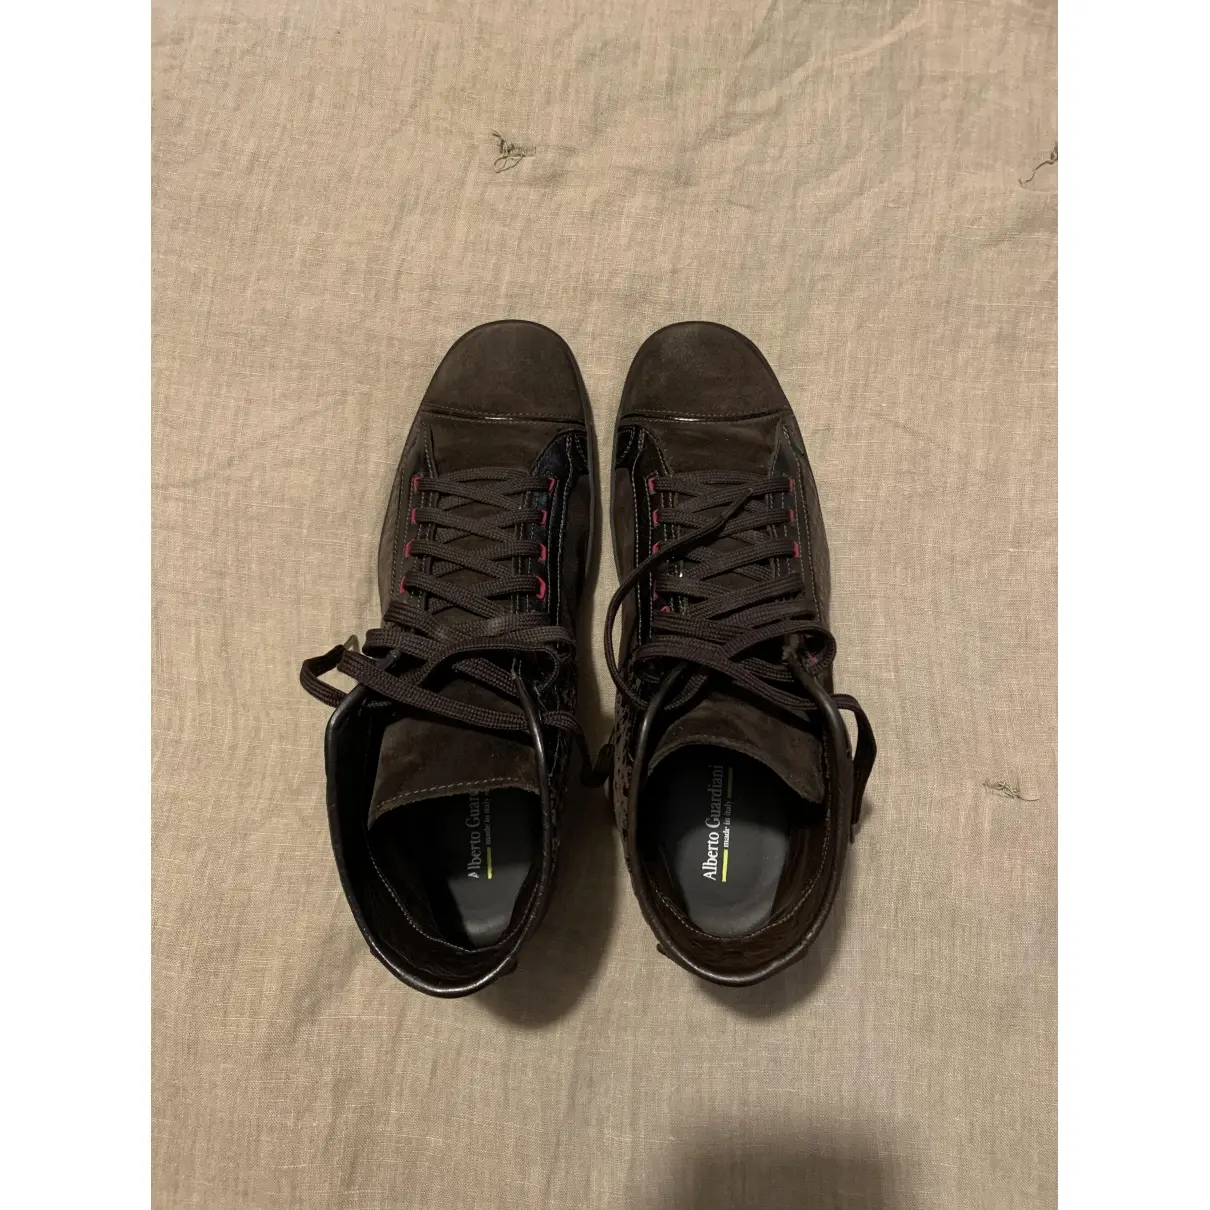 Alberto Guardiani Leather high trainers for sale